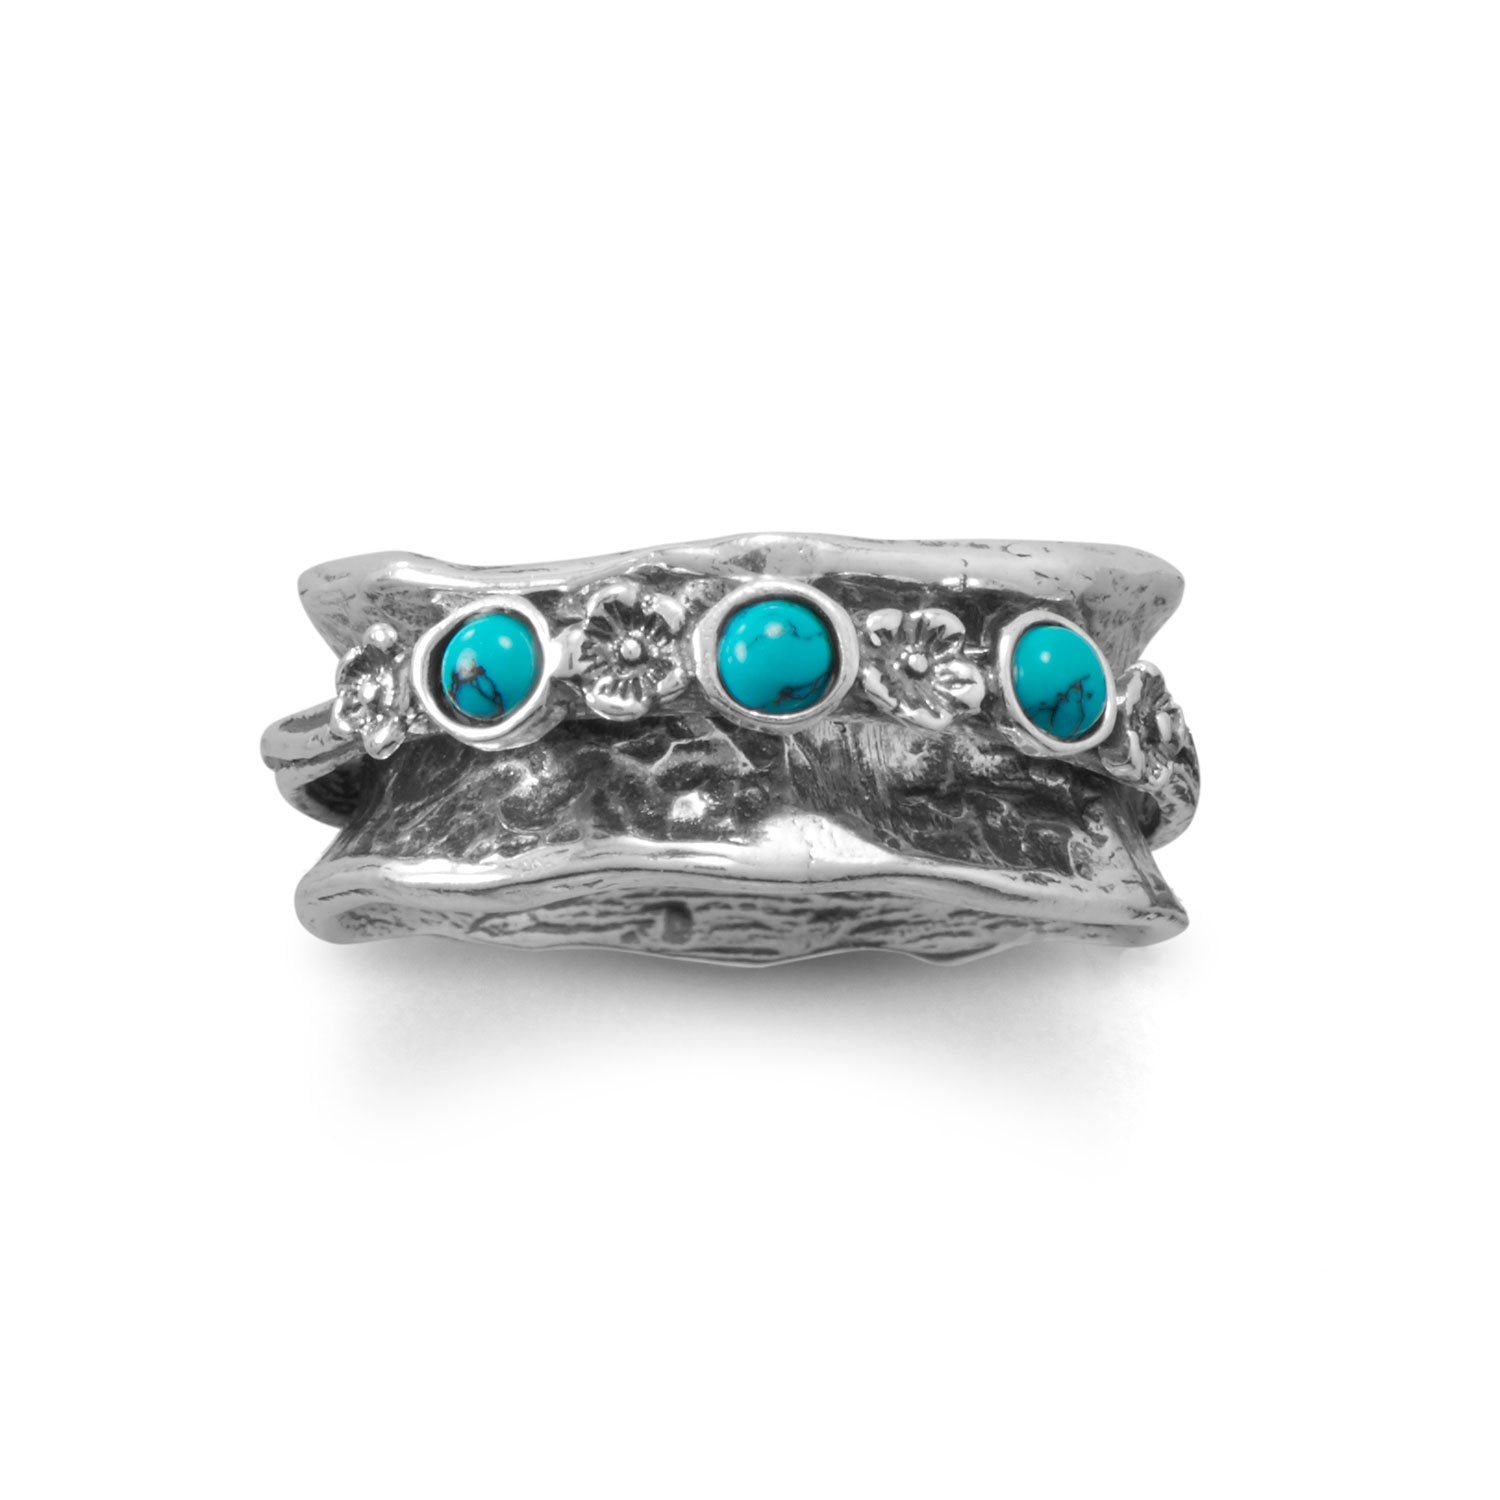 Oxidized Spin Ring with Reconstituted Turquoise Stones - Joyeria Lady